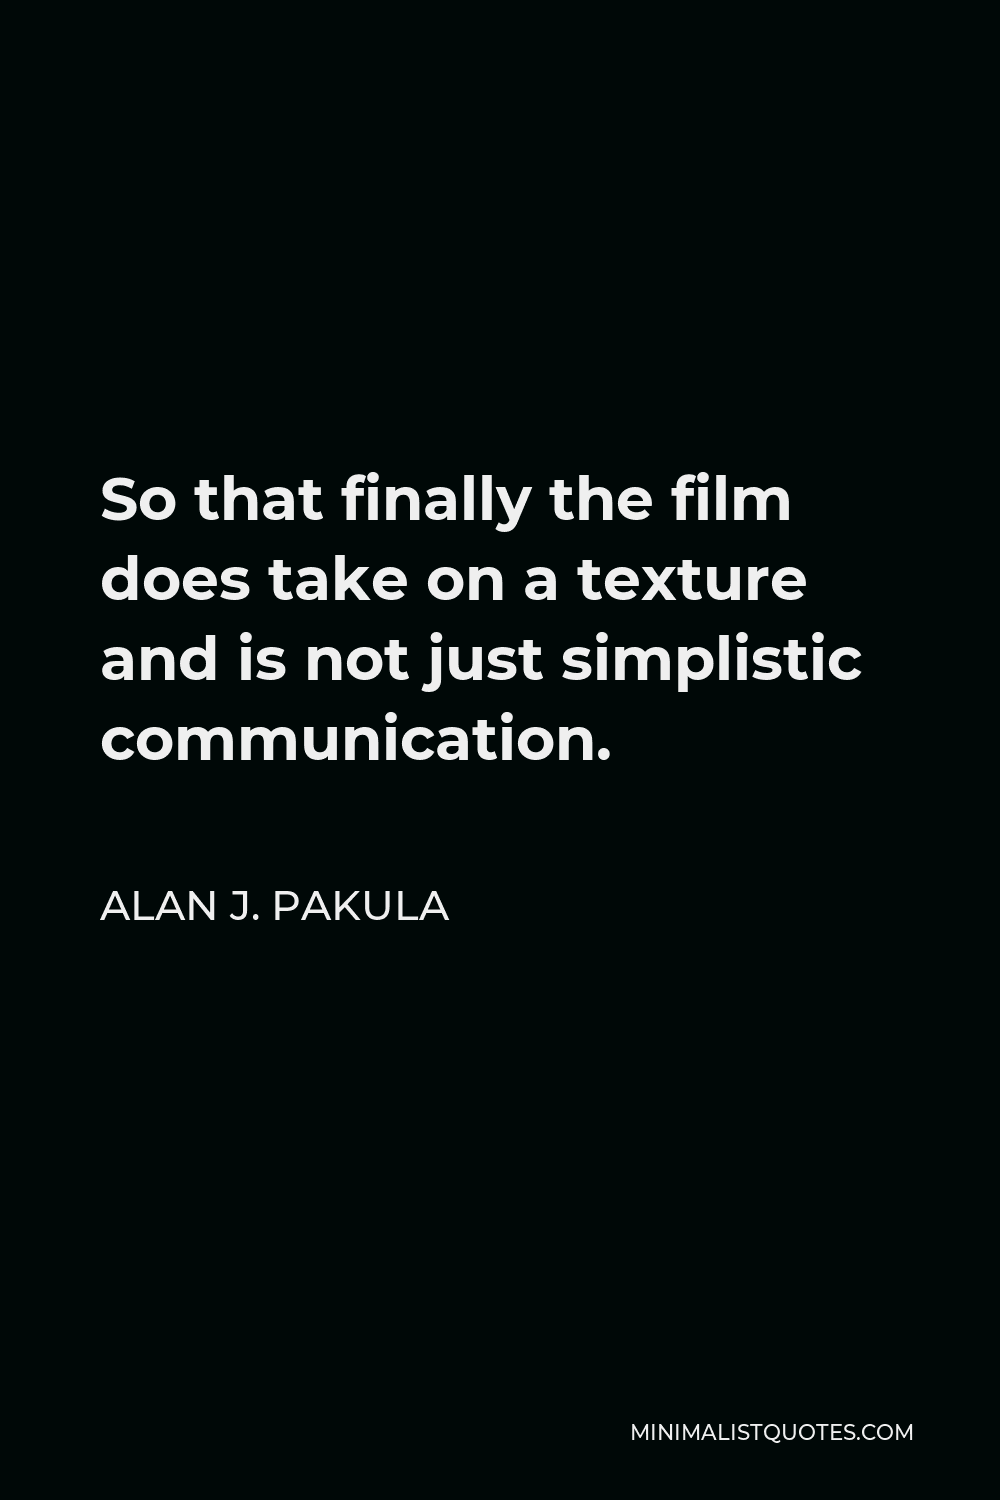 Alan J. Pakula Quote - So that finally the film does take on a texture and is not just simplistic communication.